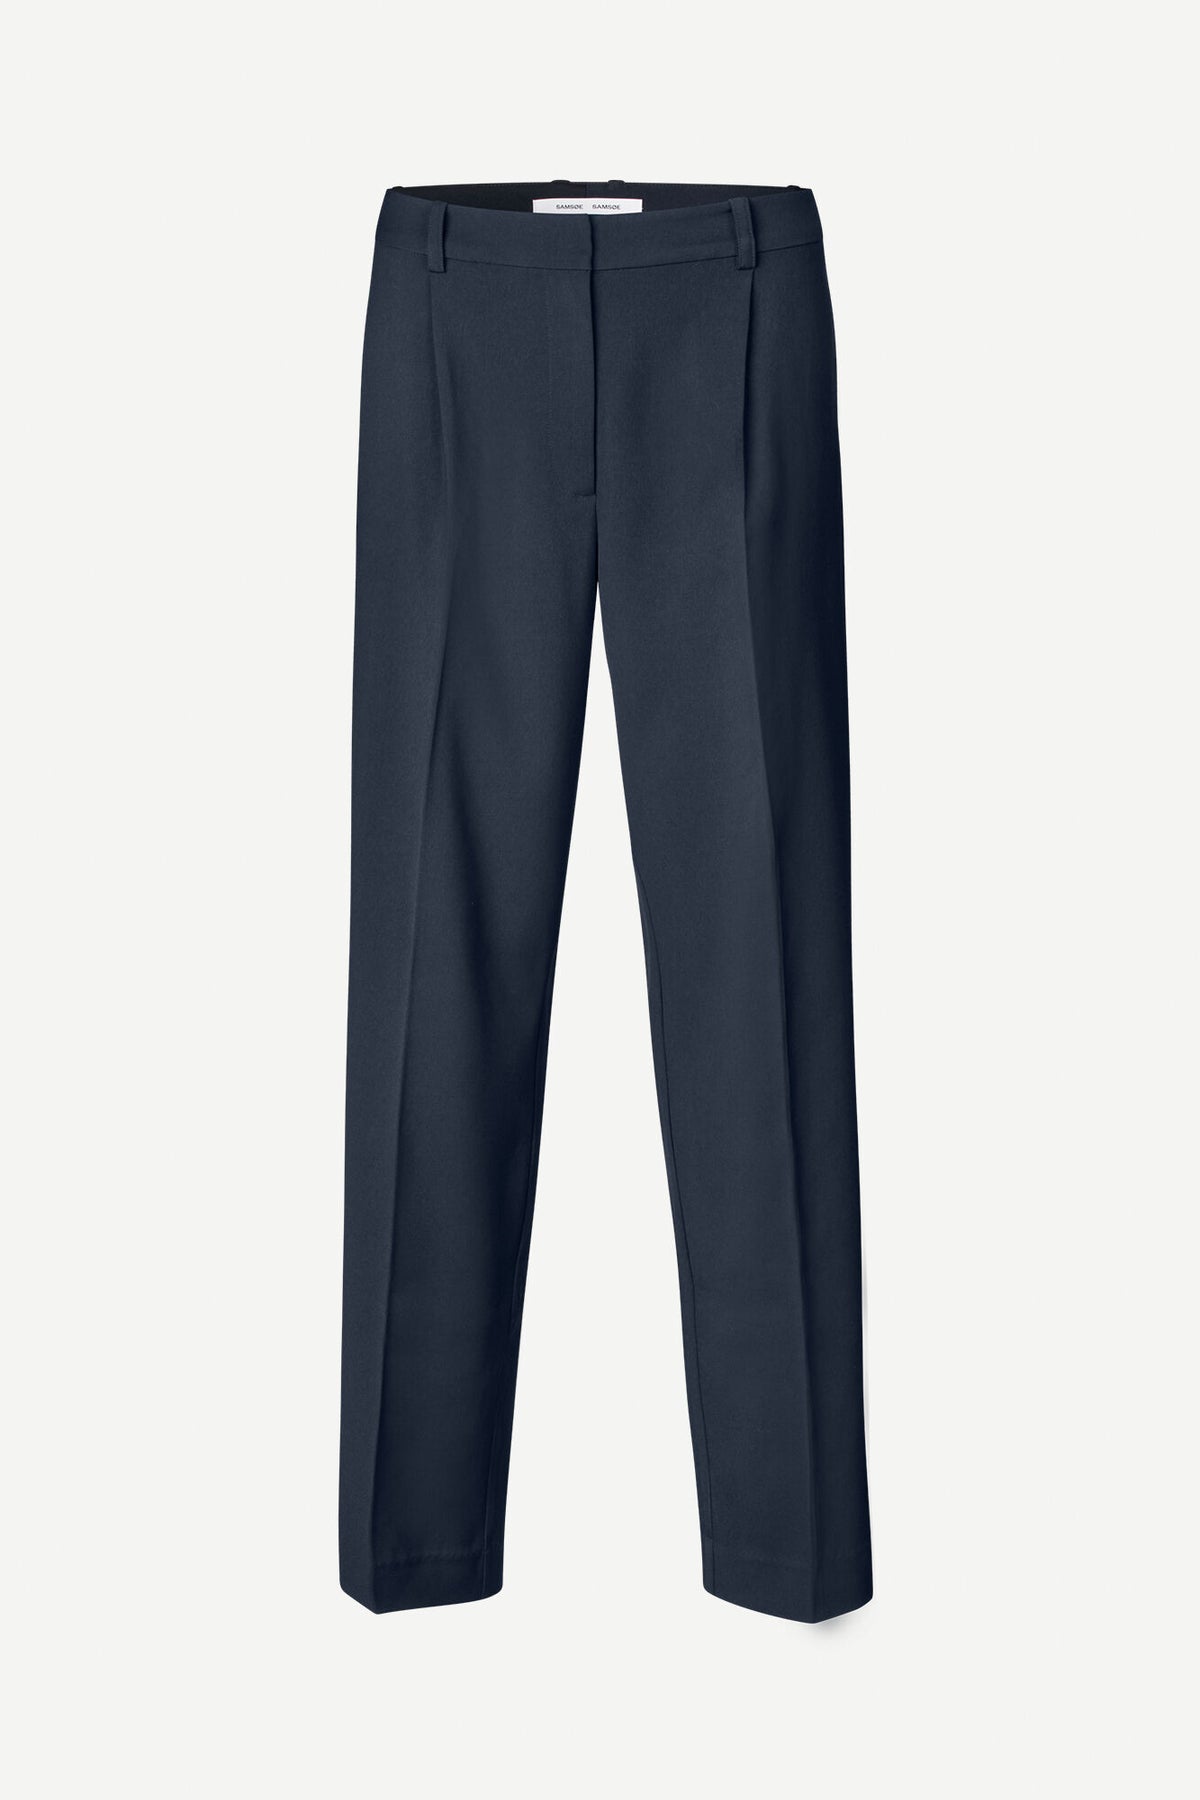 Navy tailored trousers with straight leg and fixed waistband